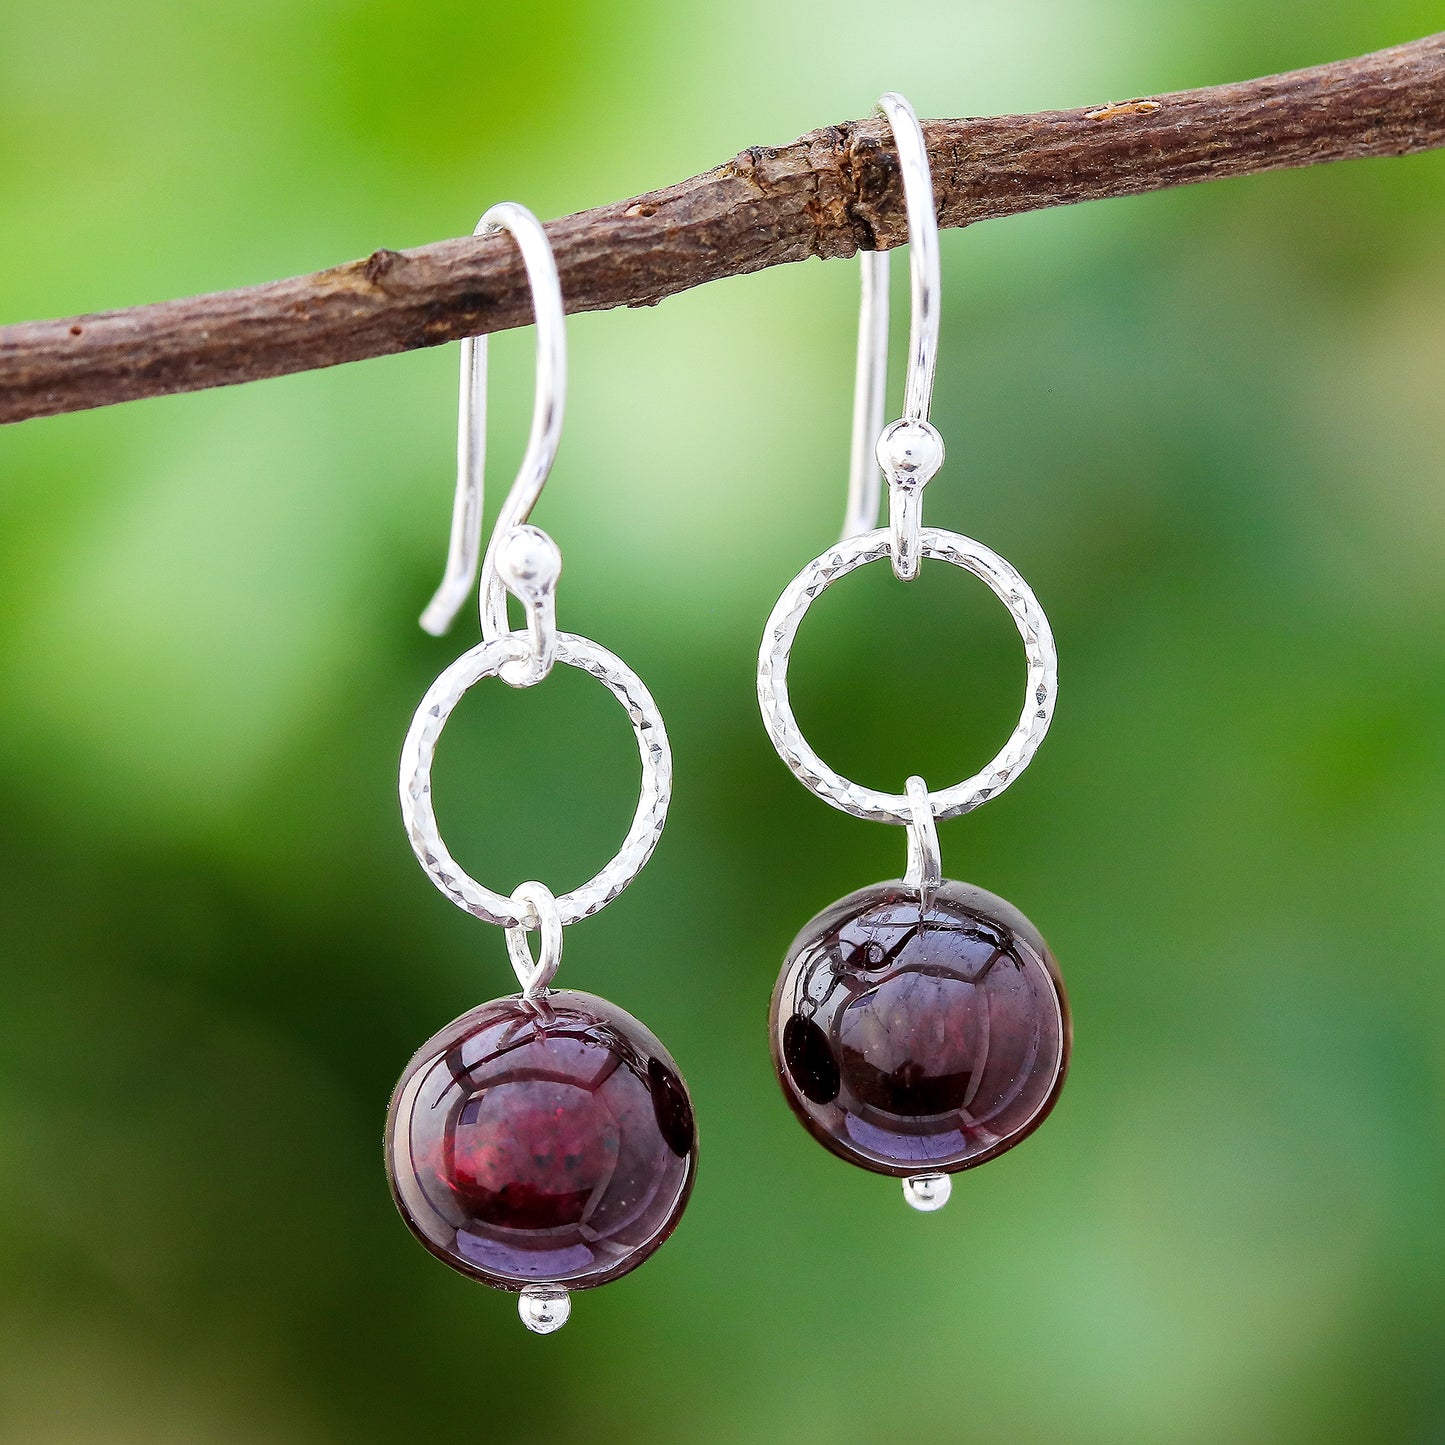 Ring Shimmer Round Garnet Dangle Earrings Crafted in Thailand